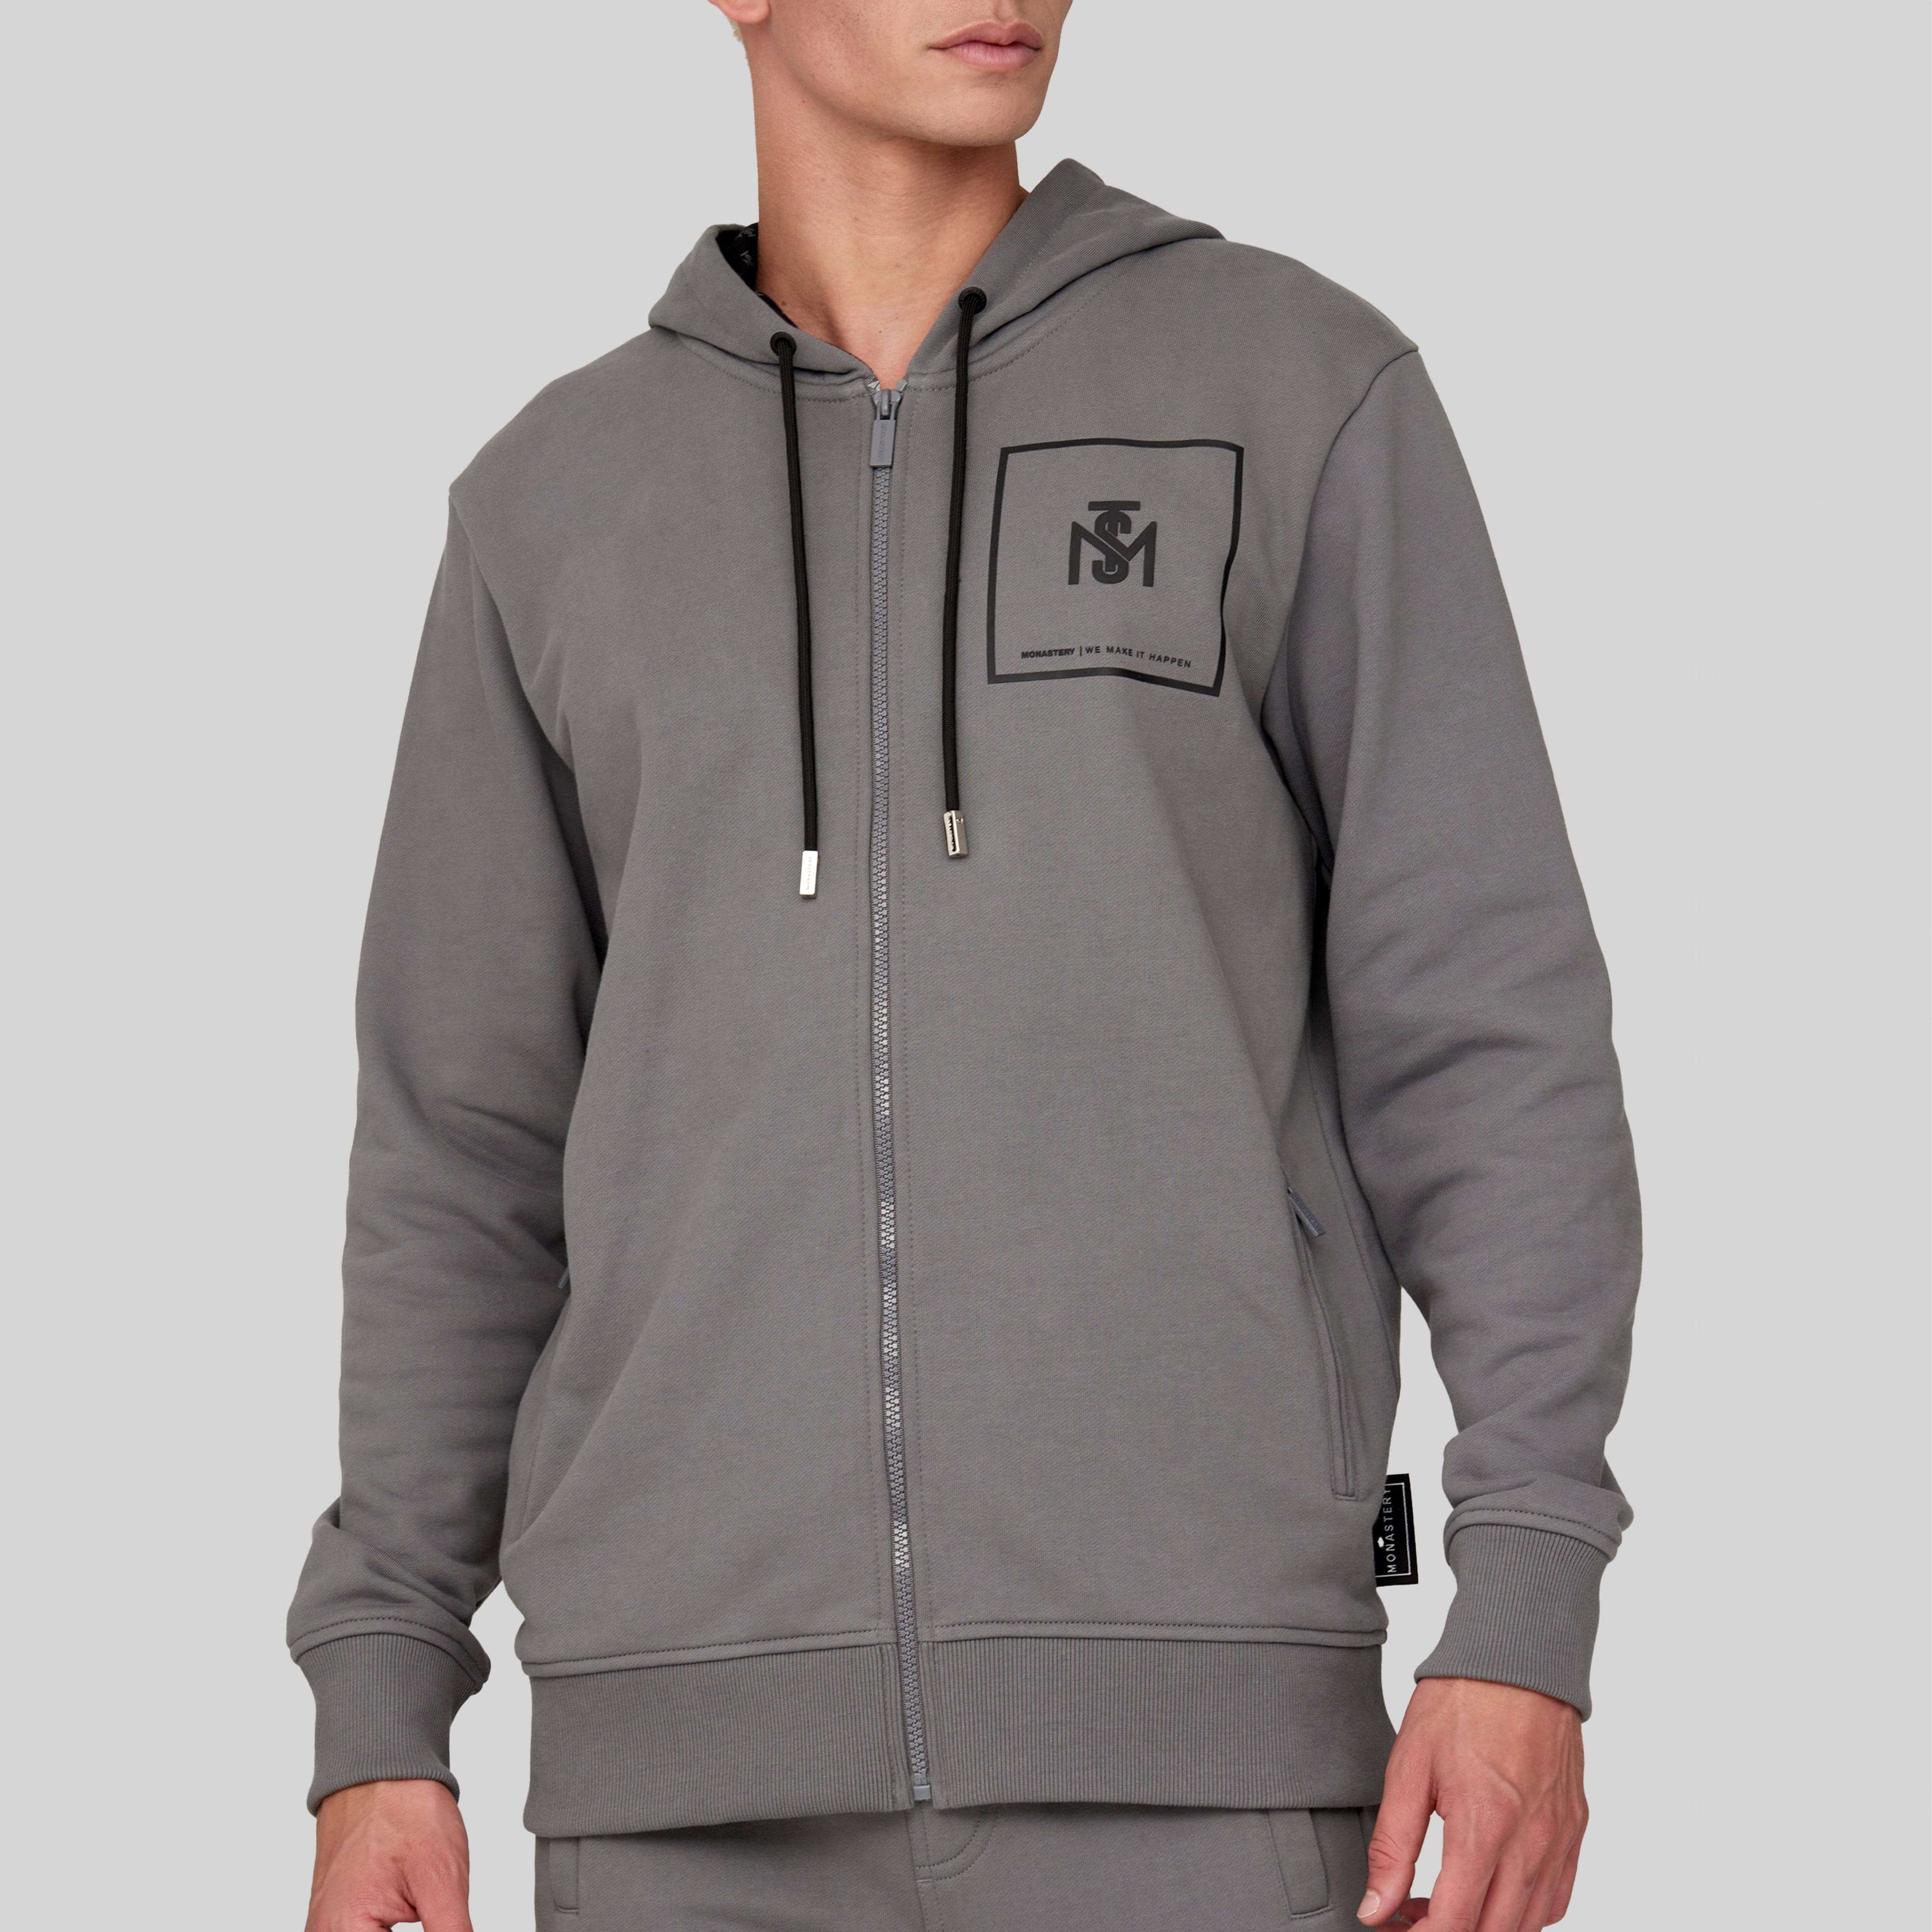 AKTION GREY HOODIE | Monastery Couture